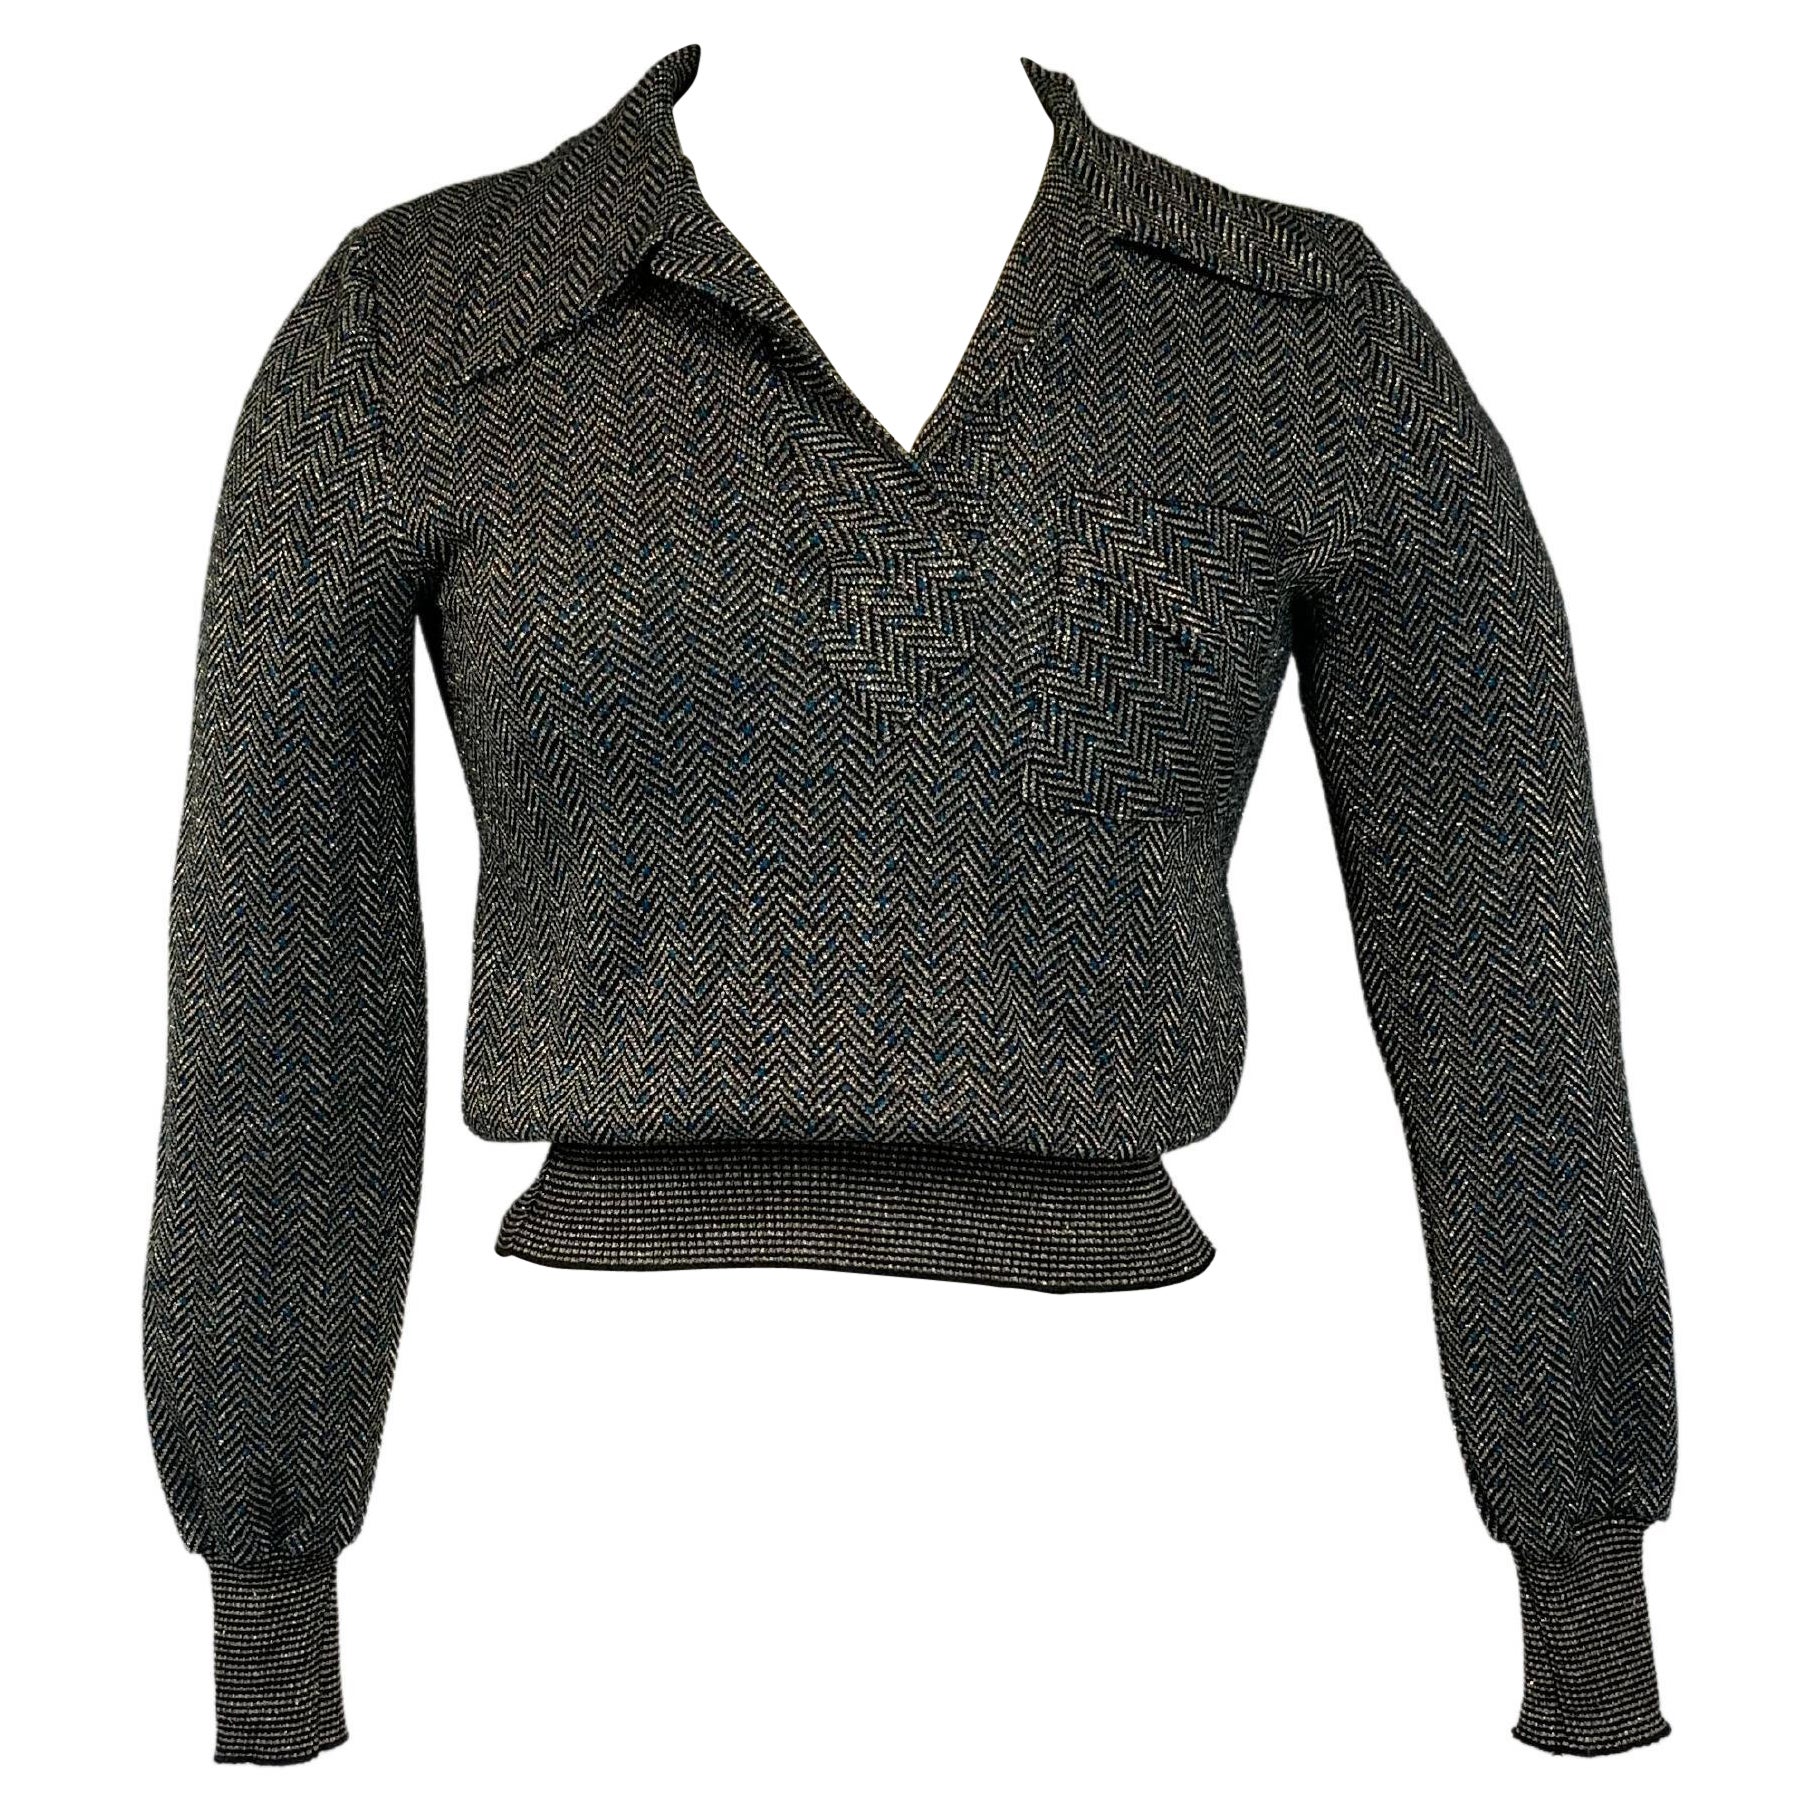 Callaghan lurex and wool jumper by Gianni Versace